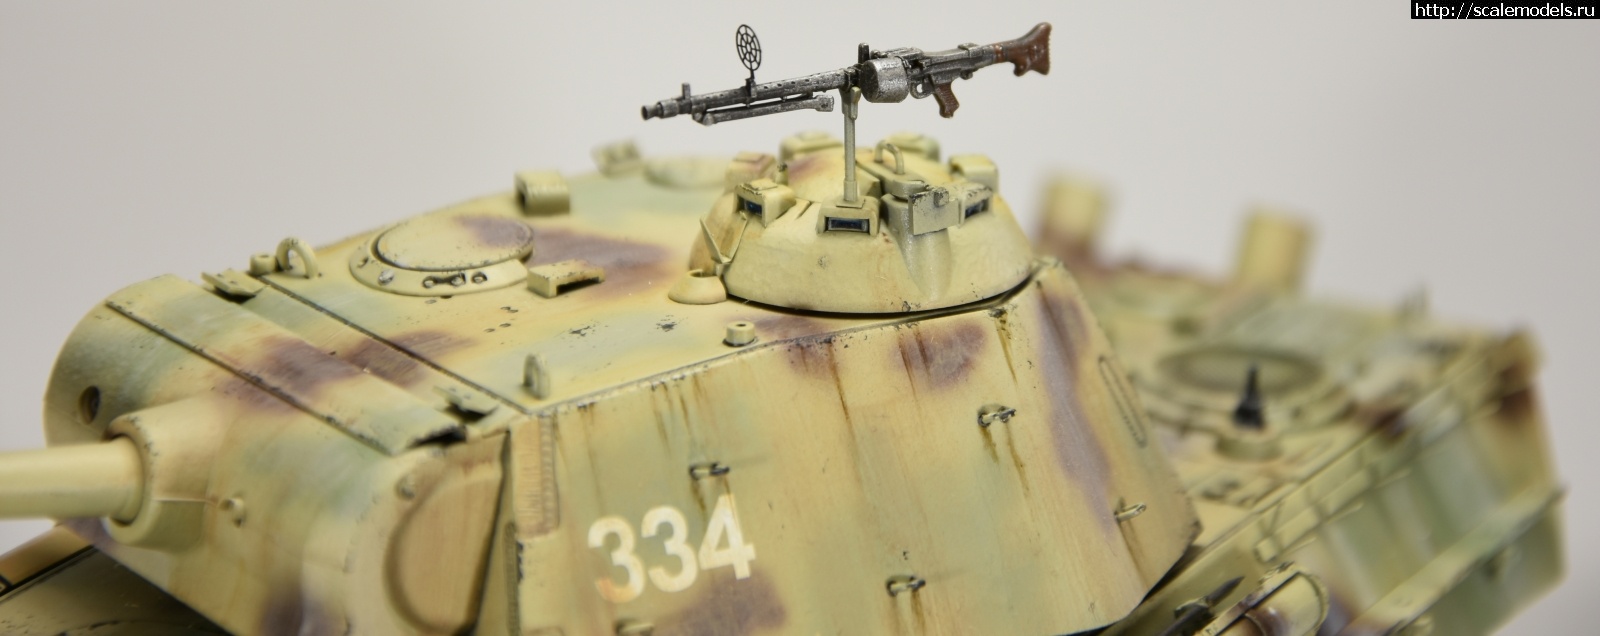 #1650461/ Panther Ausf.G   Ryefield model (RFM) - !!!  